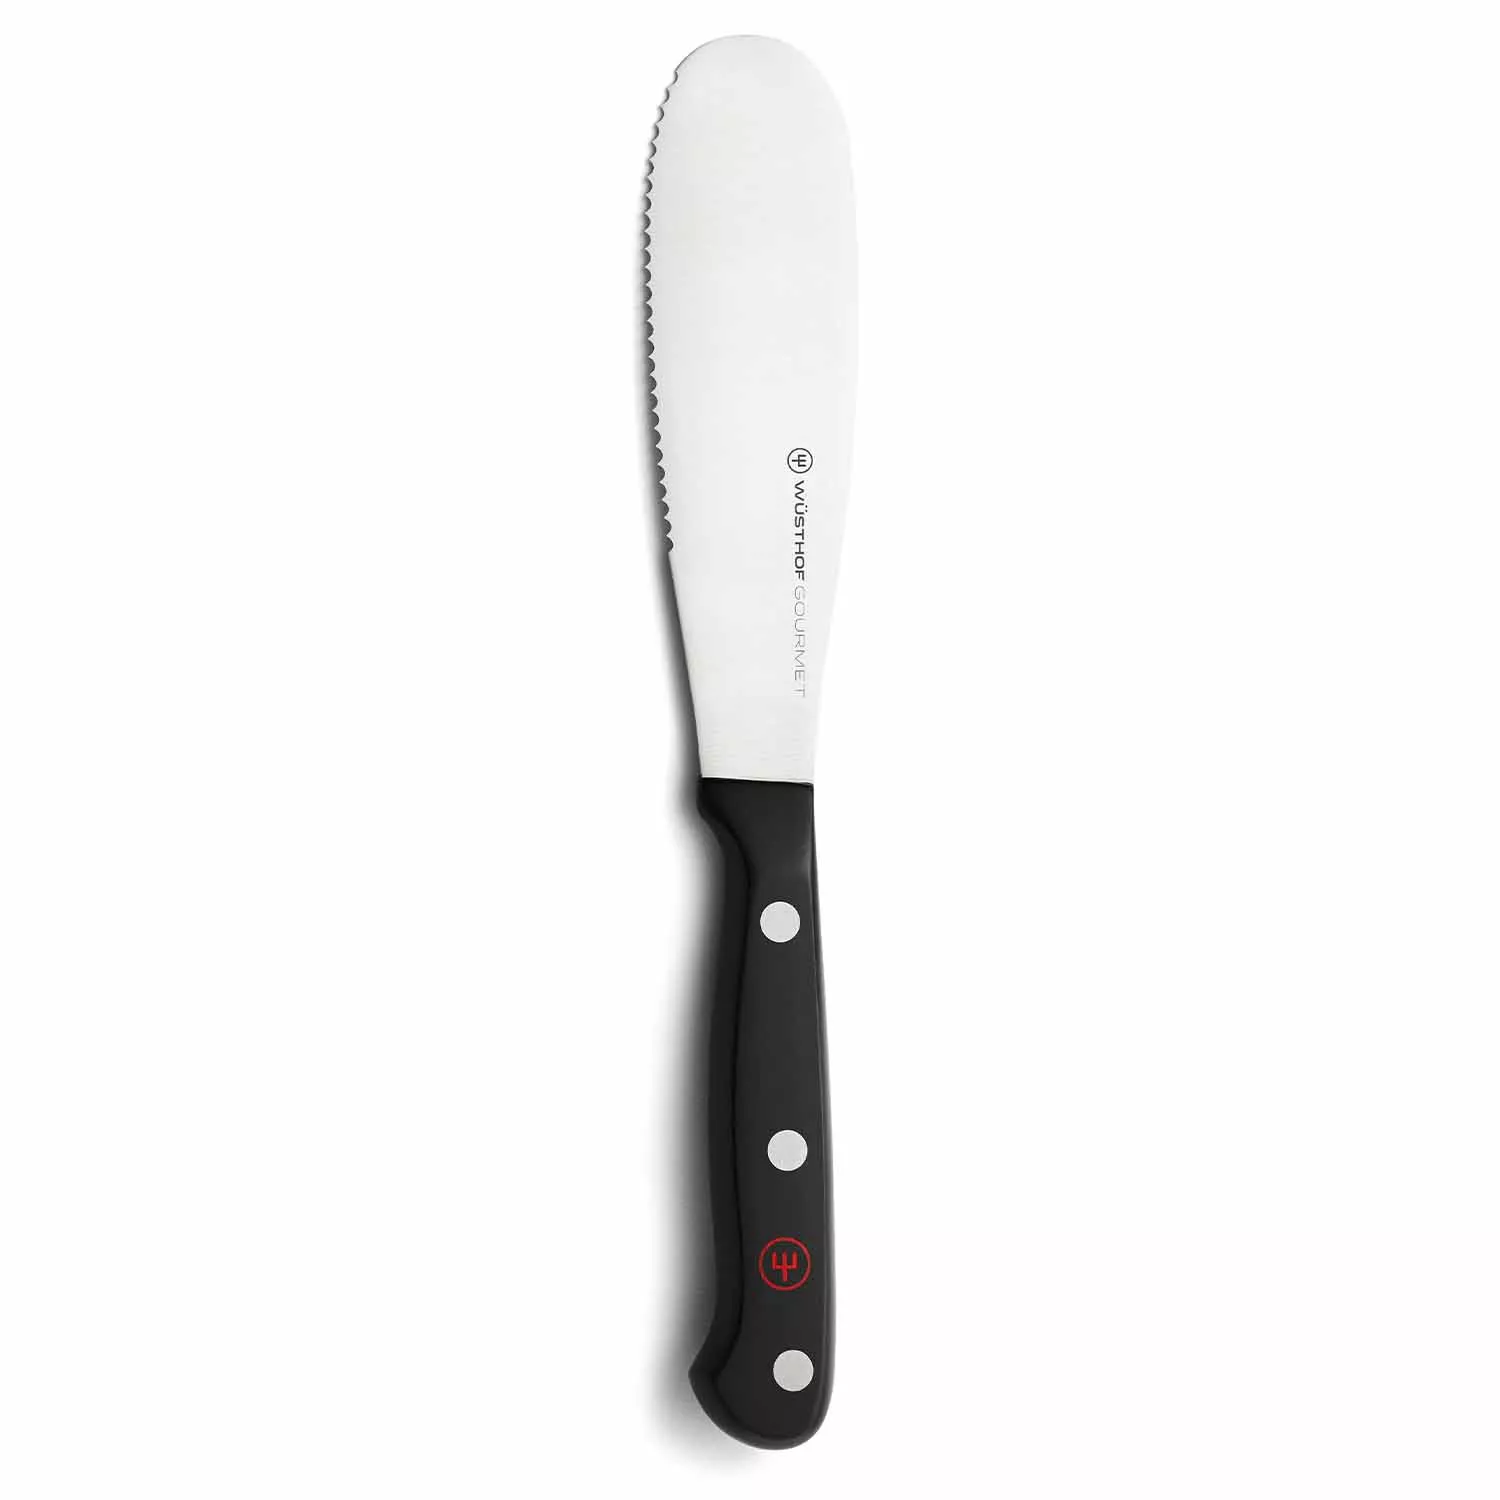 Sandwich Hand Made Knife, with White Plastic Handle Butter Spreader (2